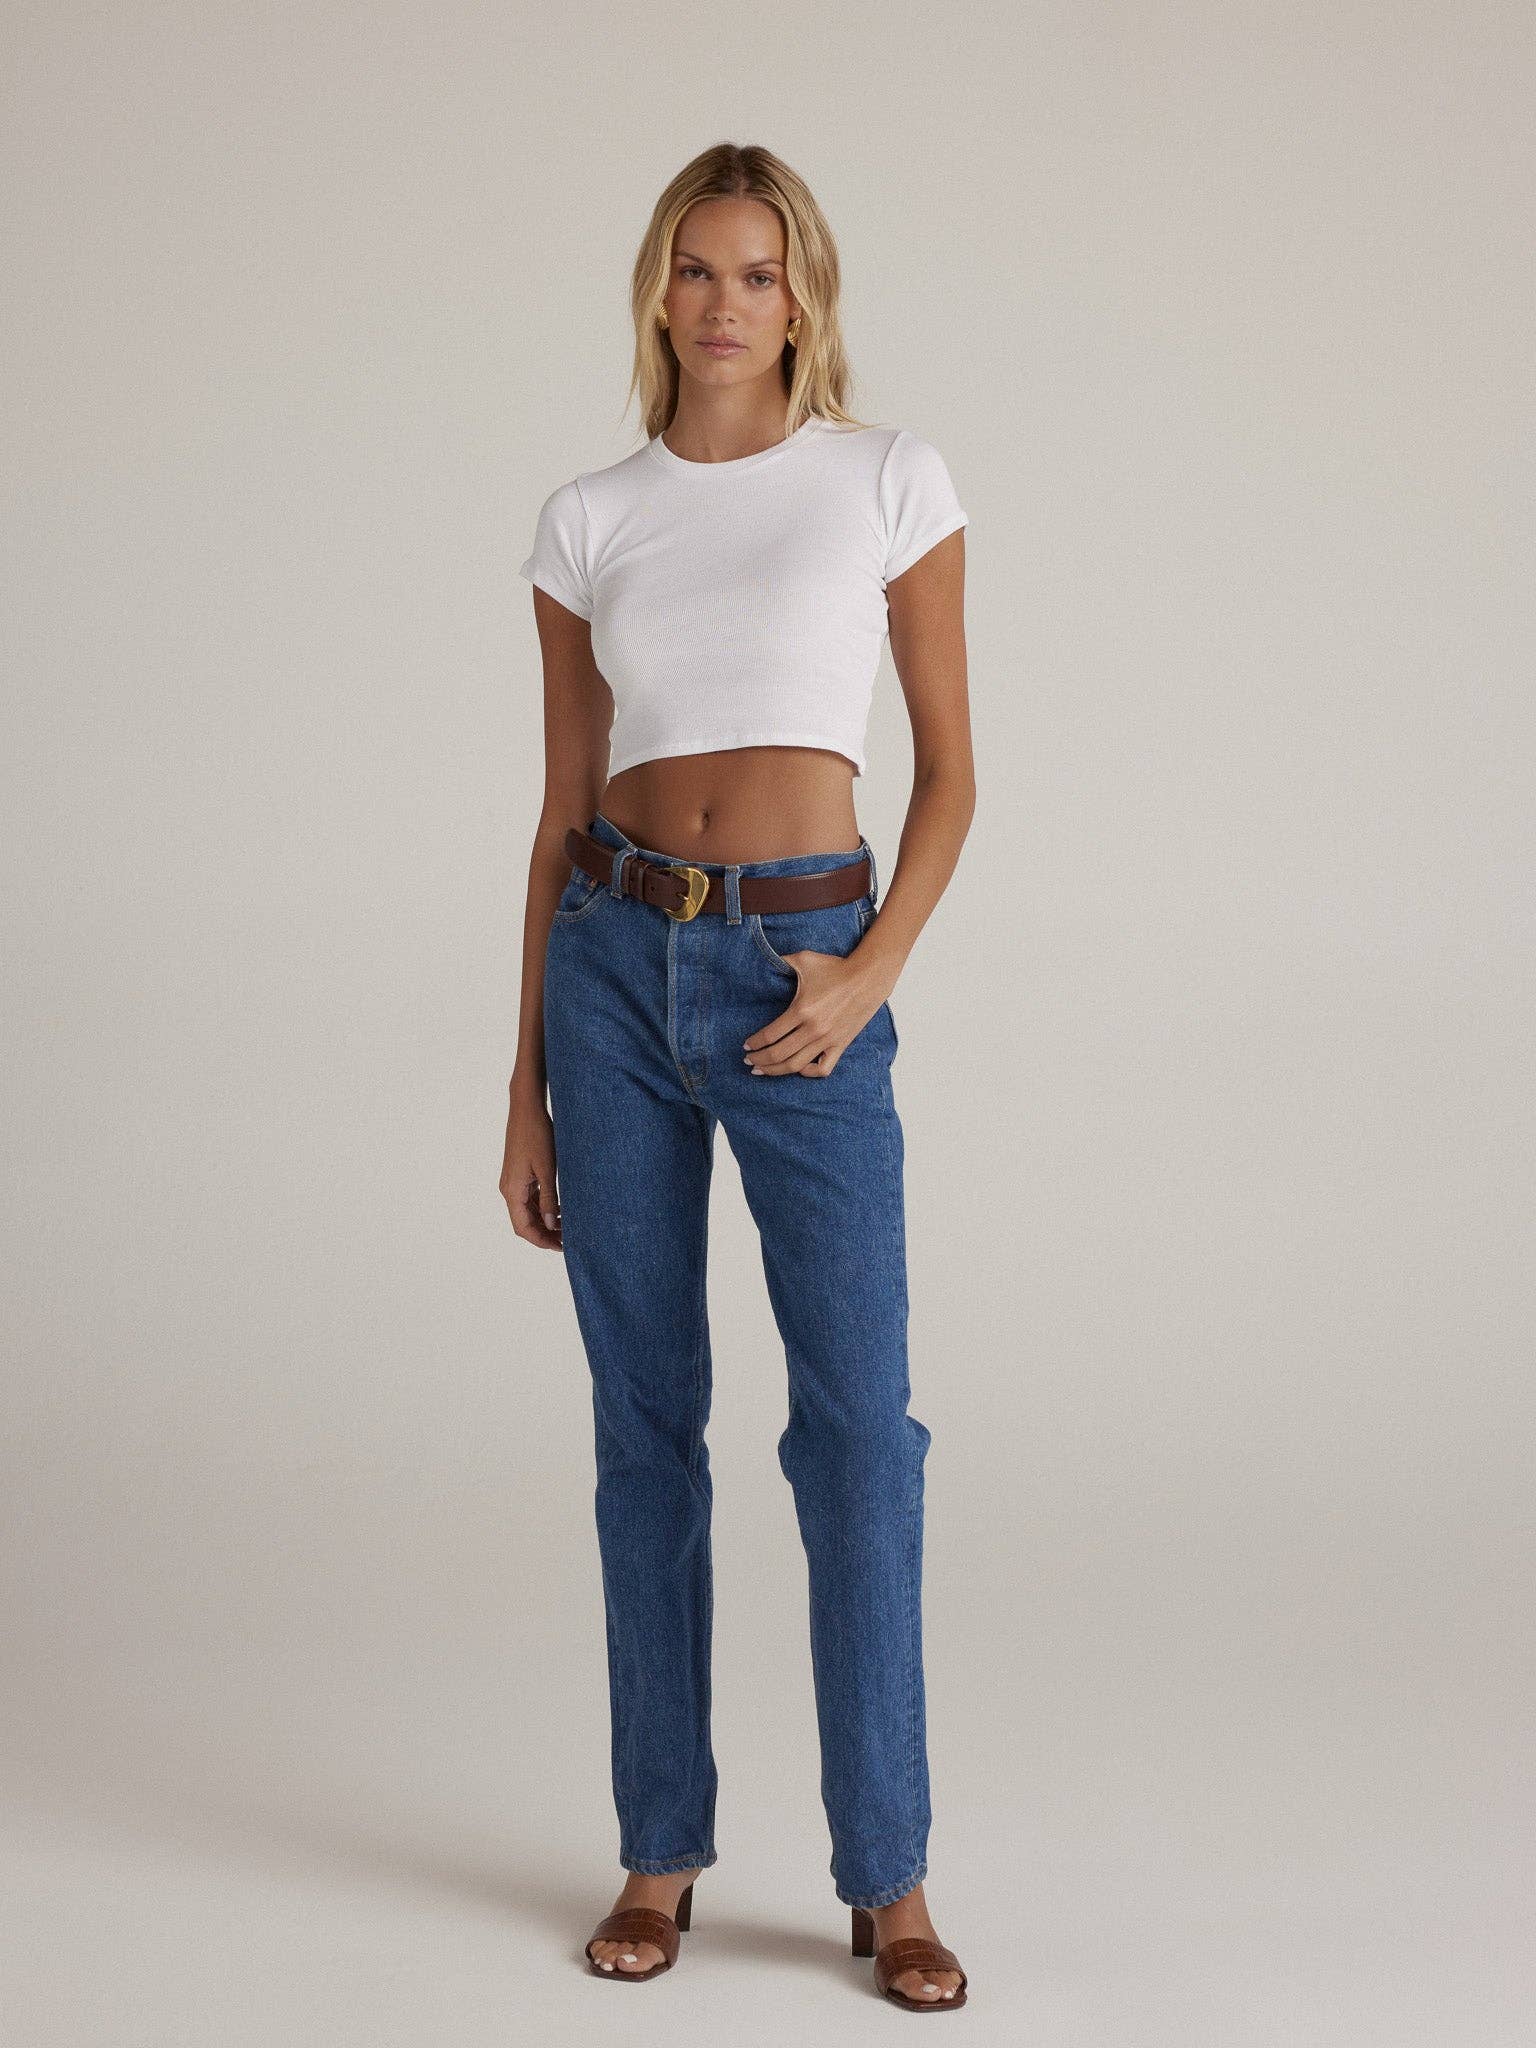 Belen White Cropped Baby Tee